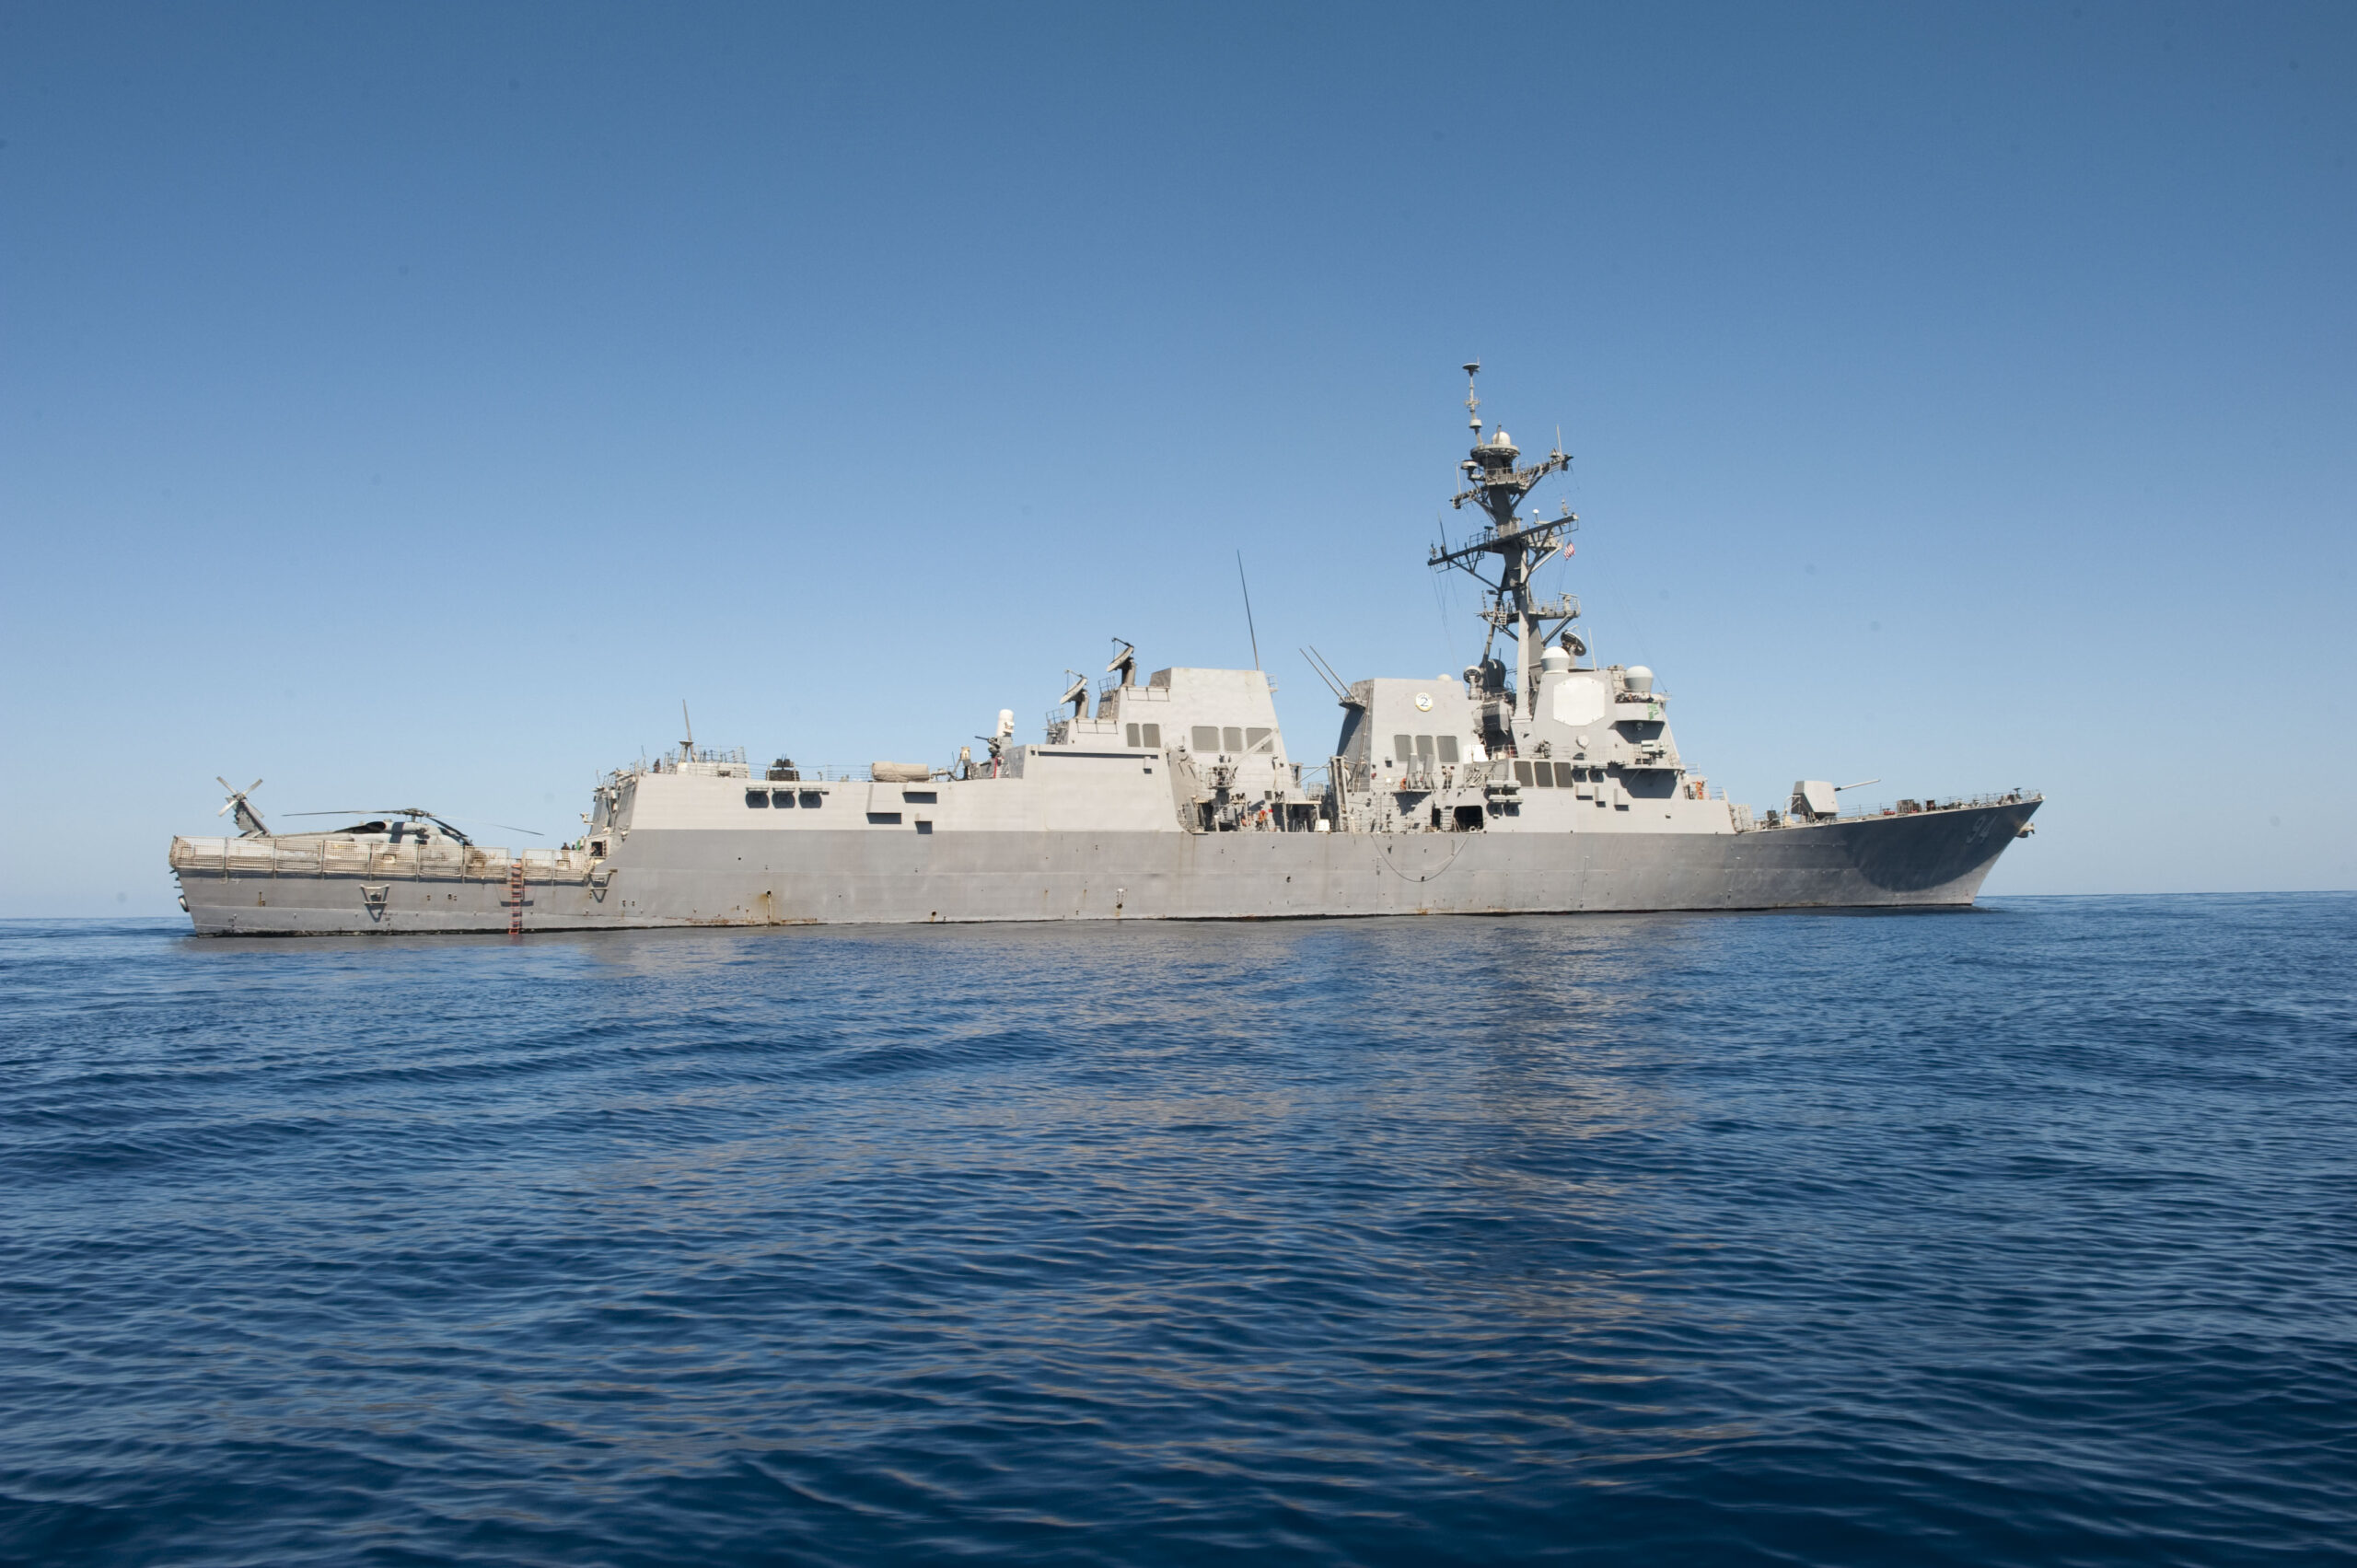 The guided-missile destroyer USS Nitze (DDG 94) transits the Arabian Sea. Nitze is deployed to the U.S. 5th Fleet area of responsibility conducting maritime security operations, theater security cooperation efforts and support missions as part of Operation Enduring Freedom. (U.S. Navy photo by Mass Communication Specialist 3rd Class Jeff Atherton)